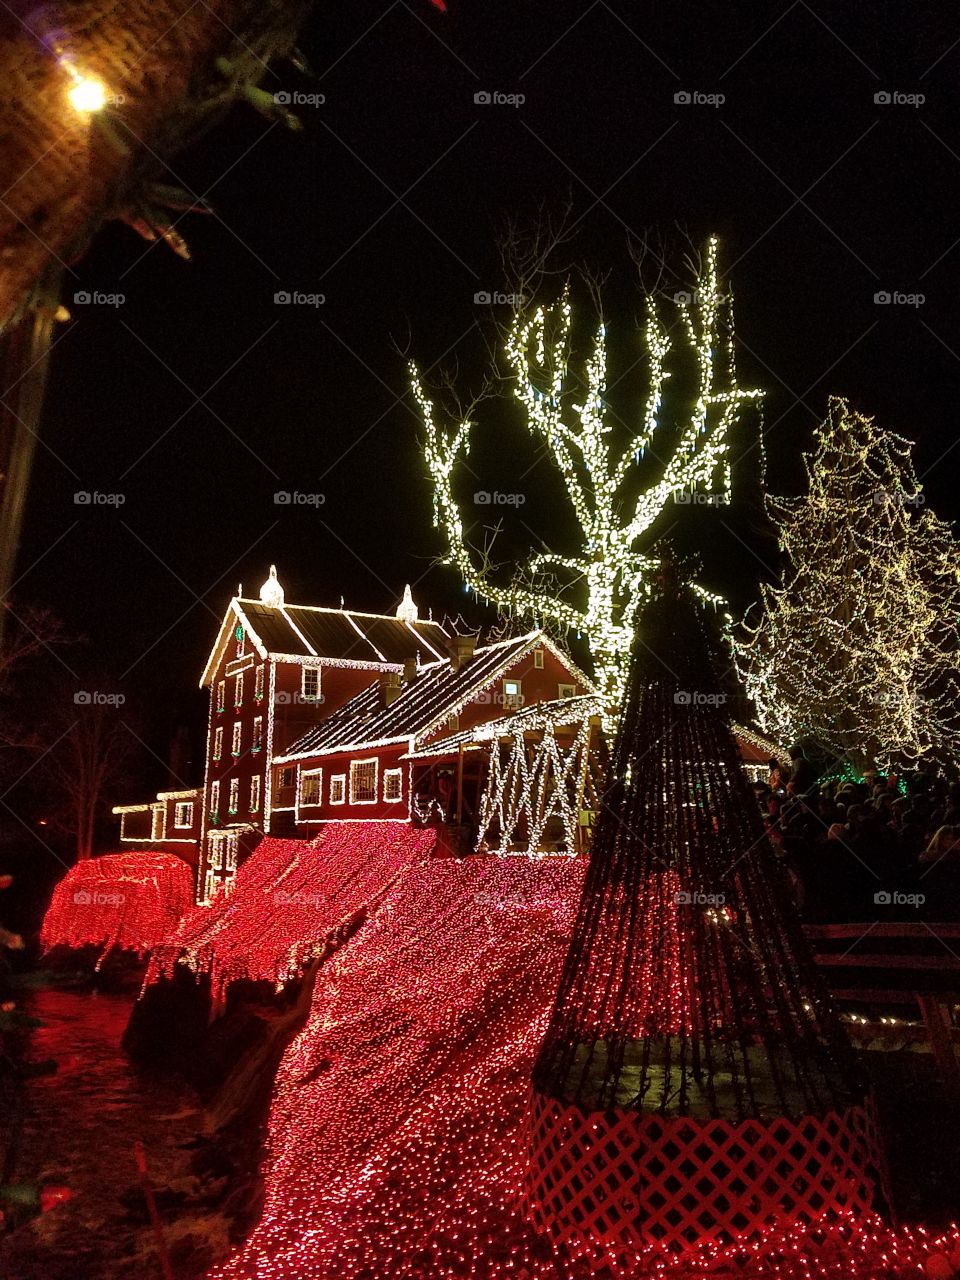 Millions of lights at Clifton Mill, Ohio